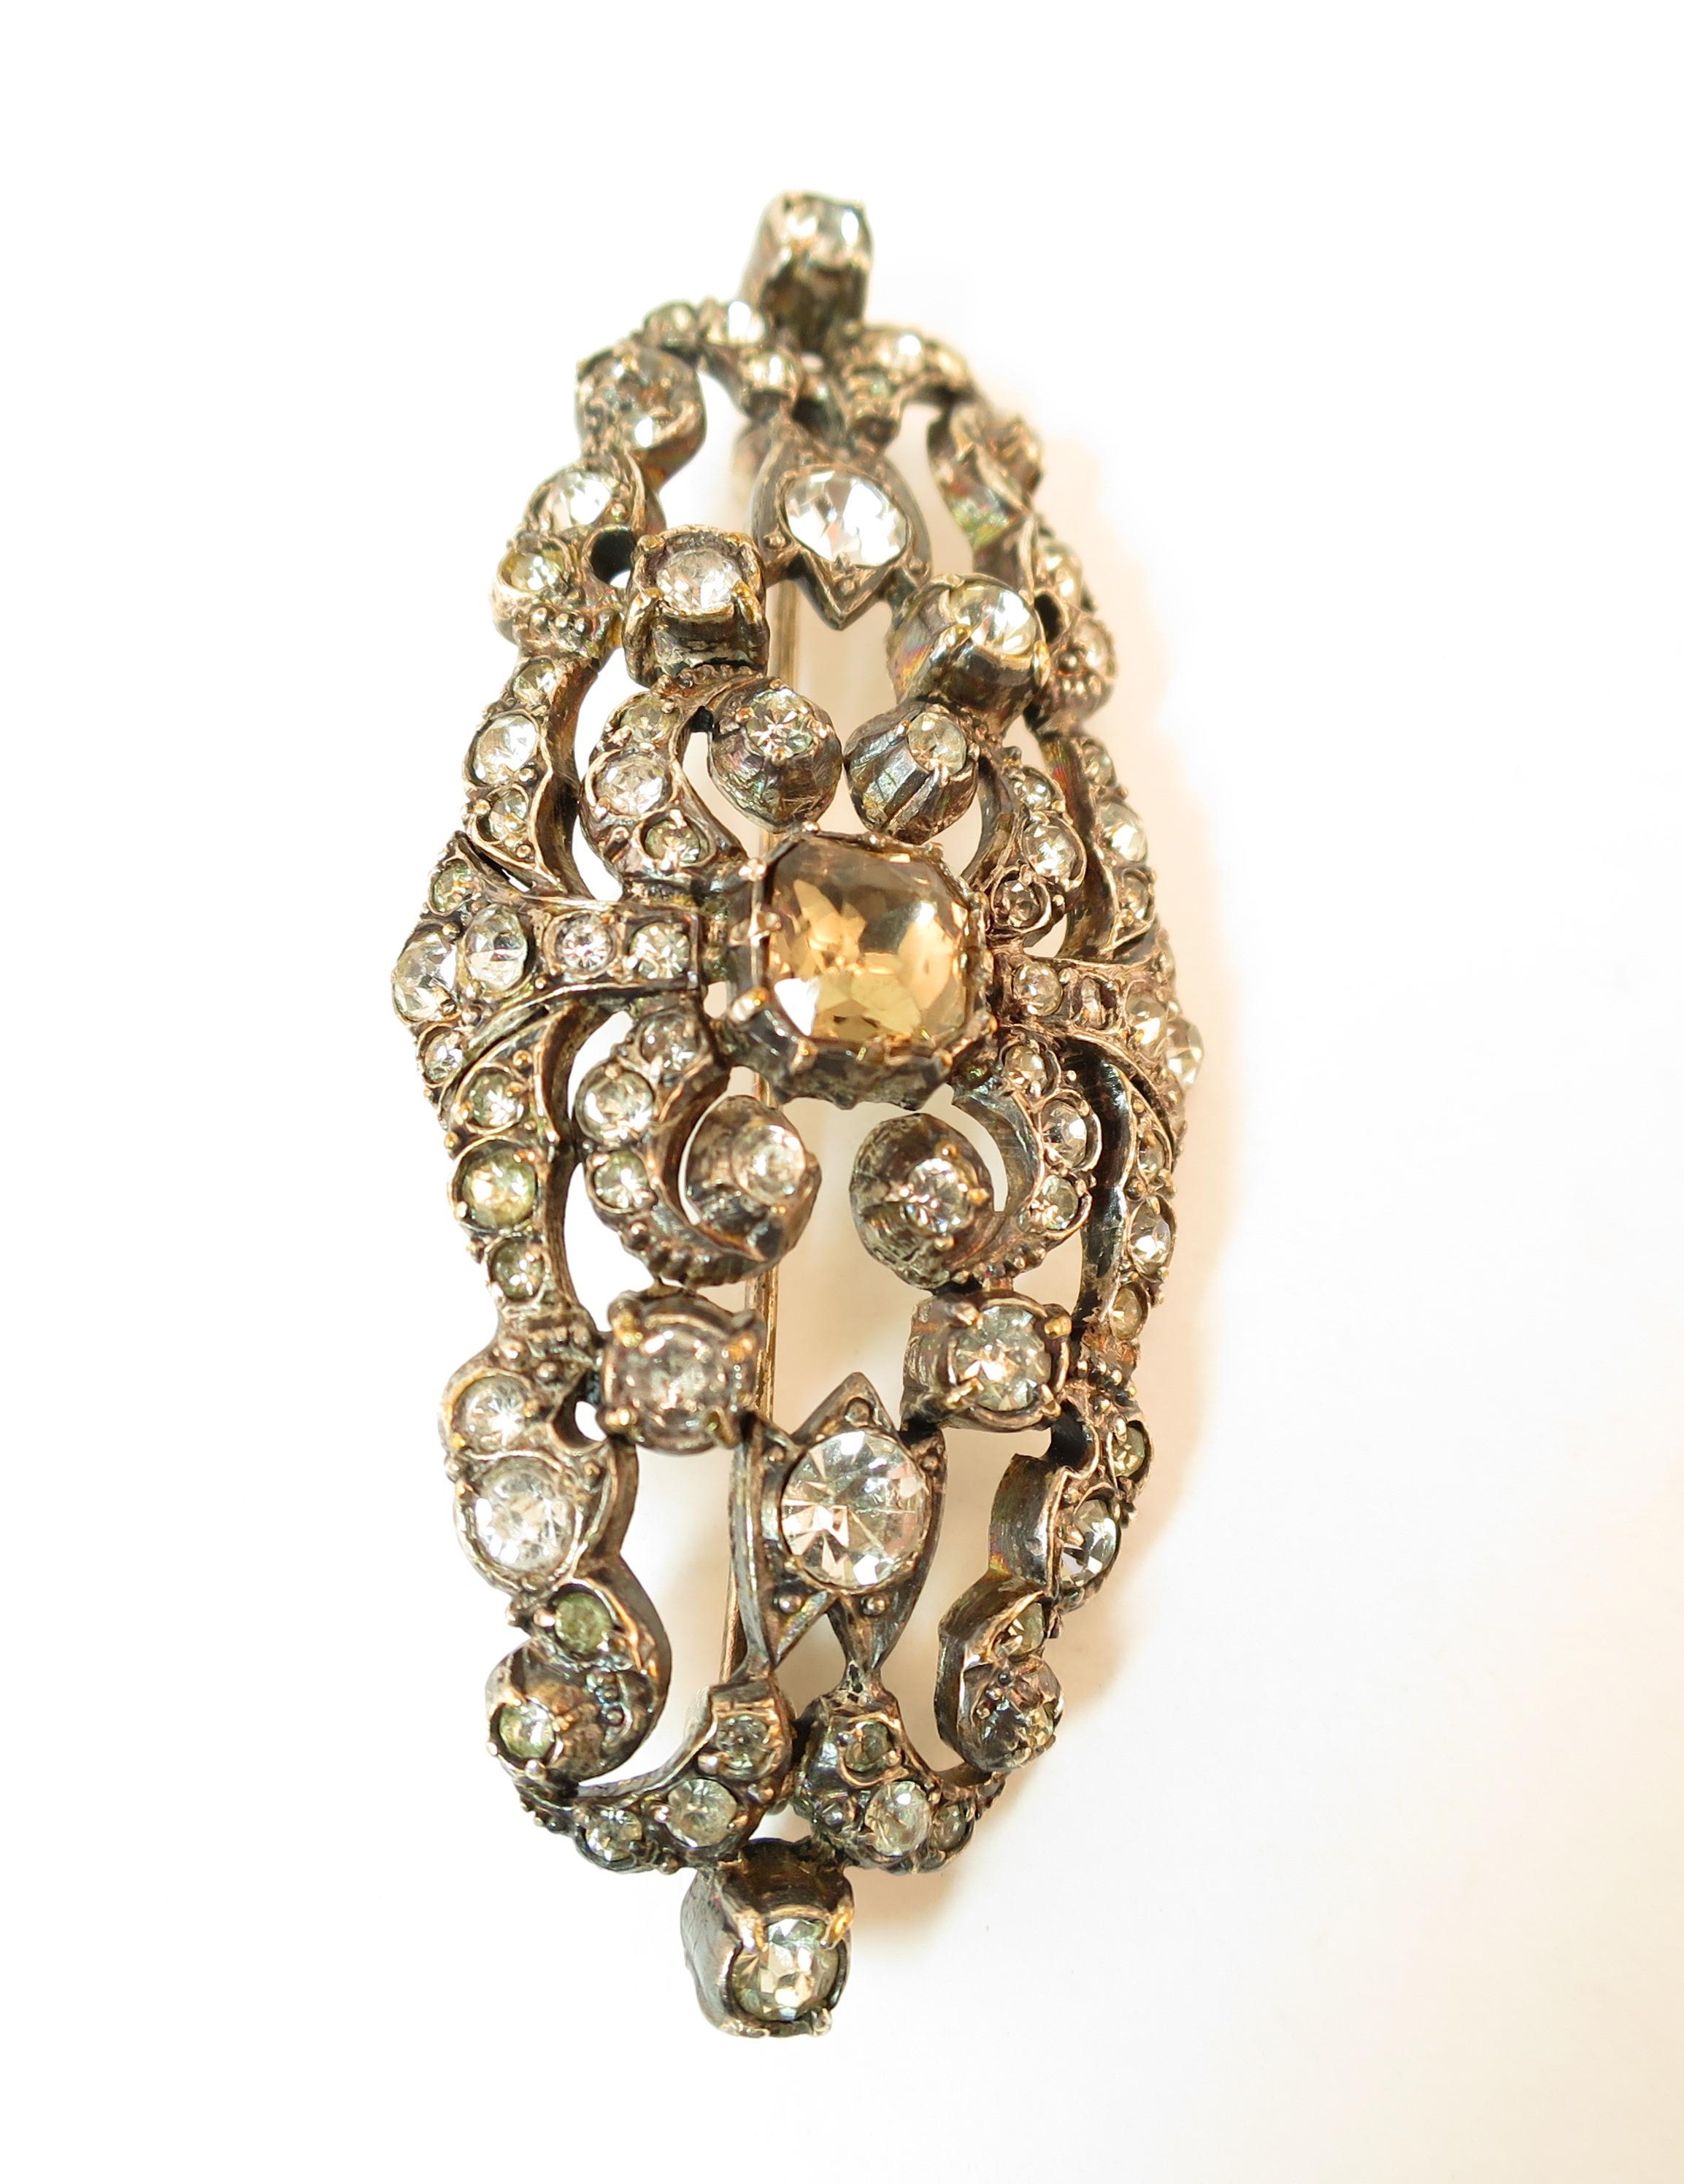 Edwardian Hand-Wrought Sterling & French Paste Brooch Circa 1905 im Angebot 1